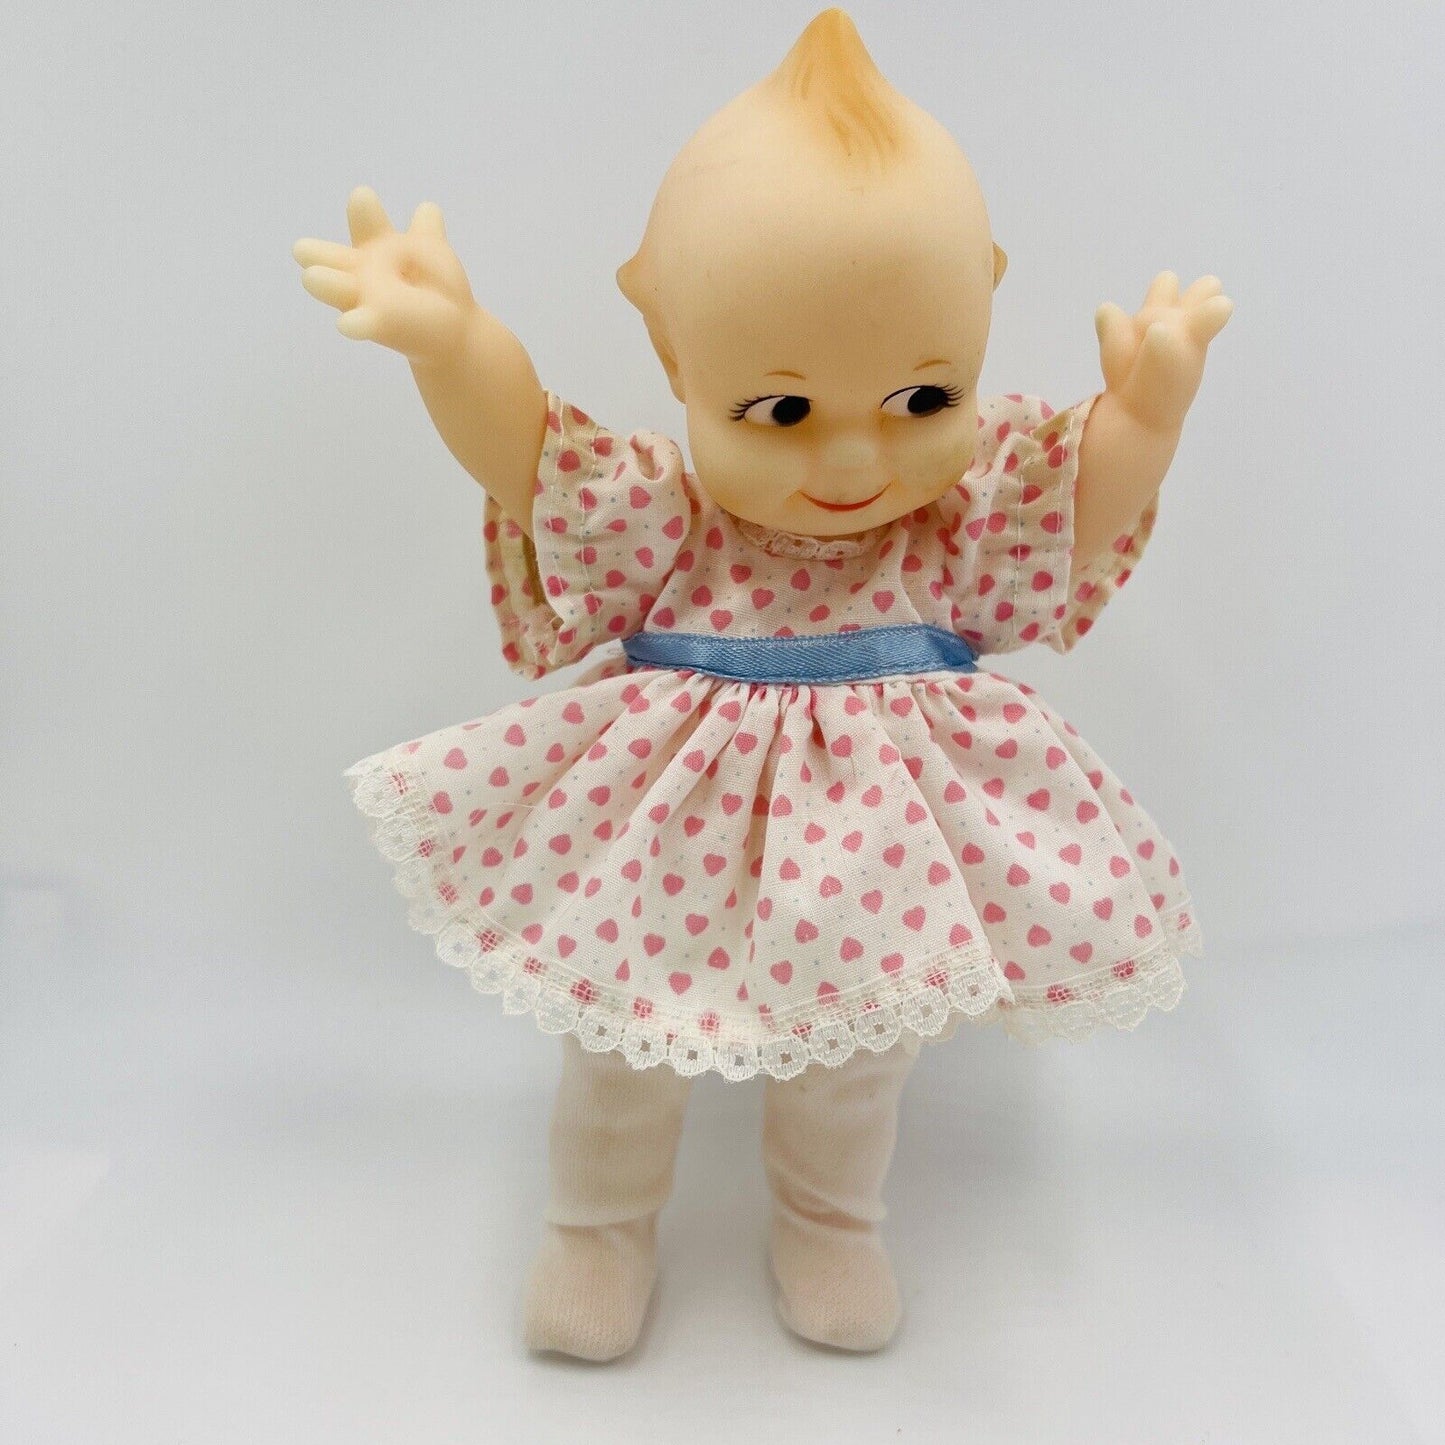 Kewpie Cameo Baby Doll by Jesco Toys Vintage 1964 Toy